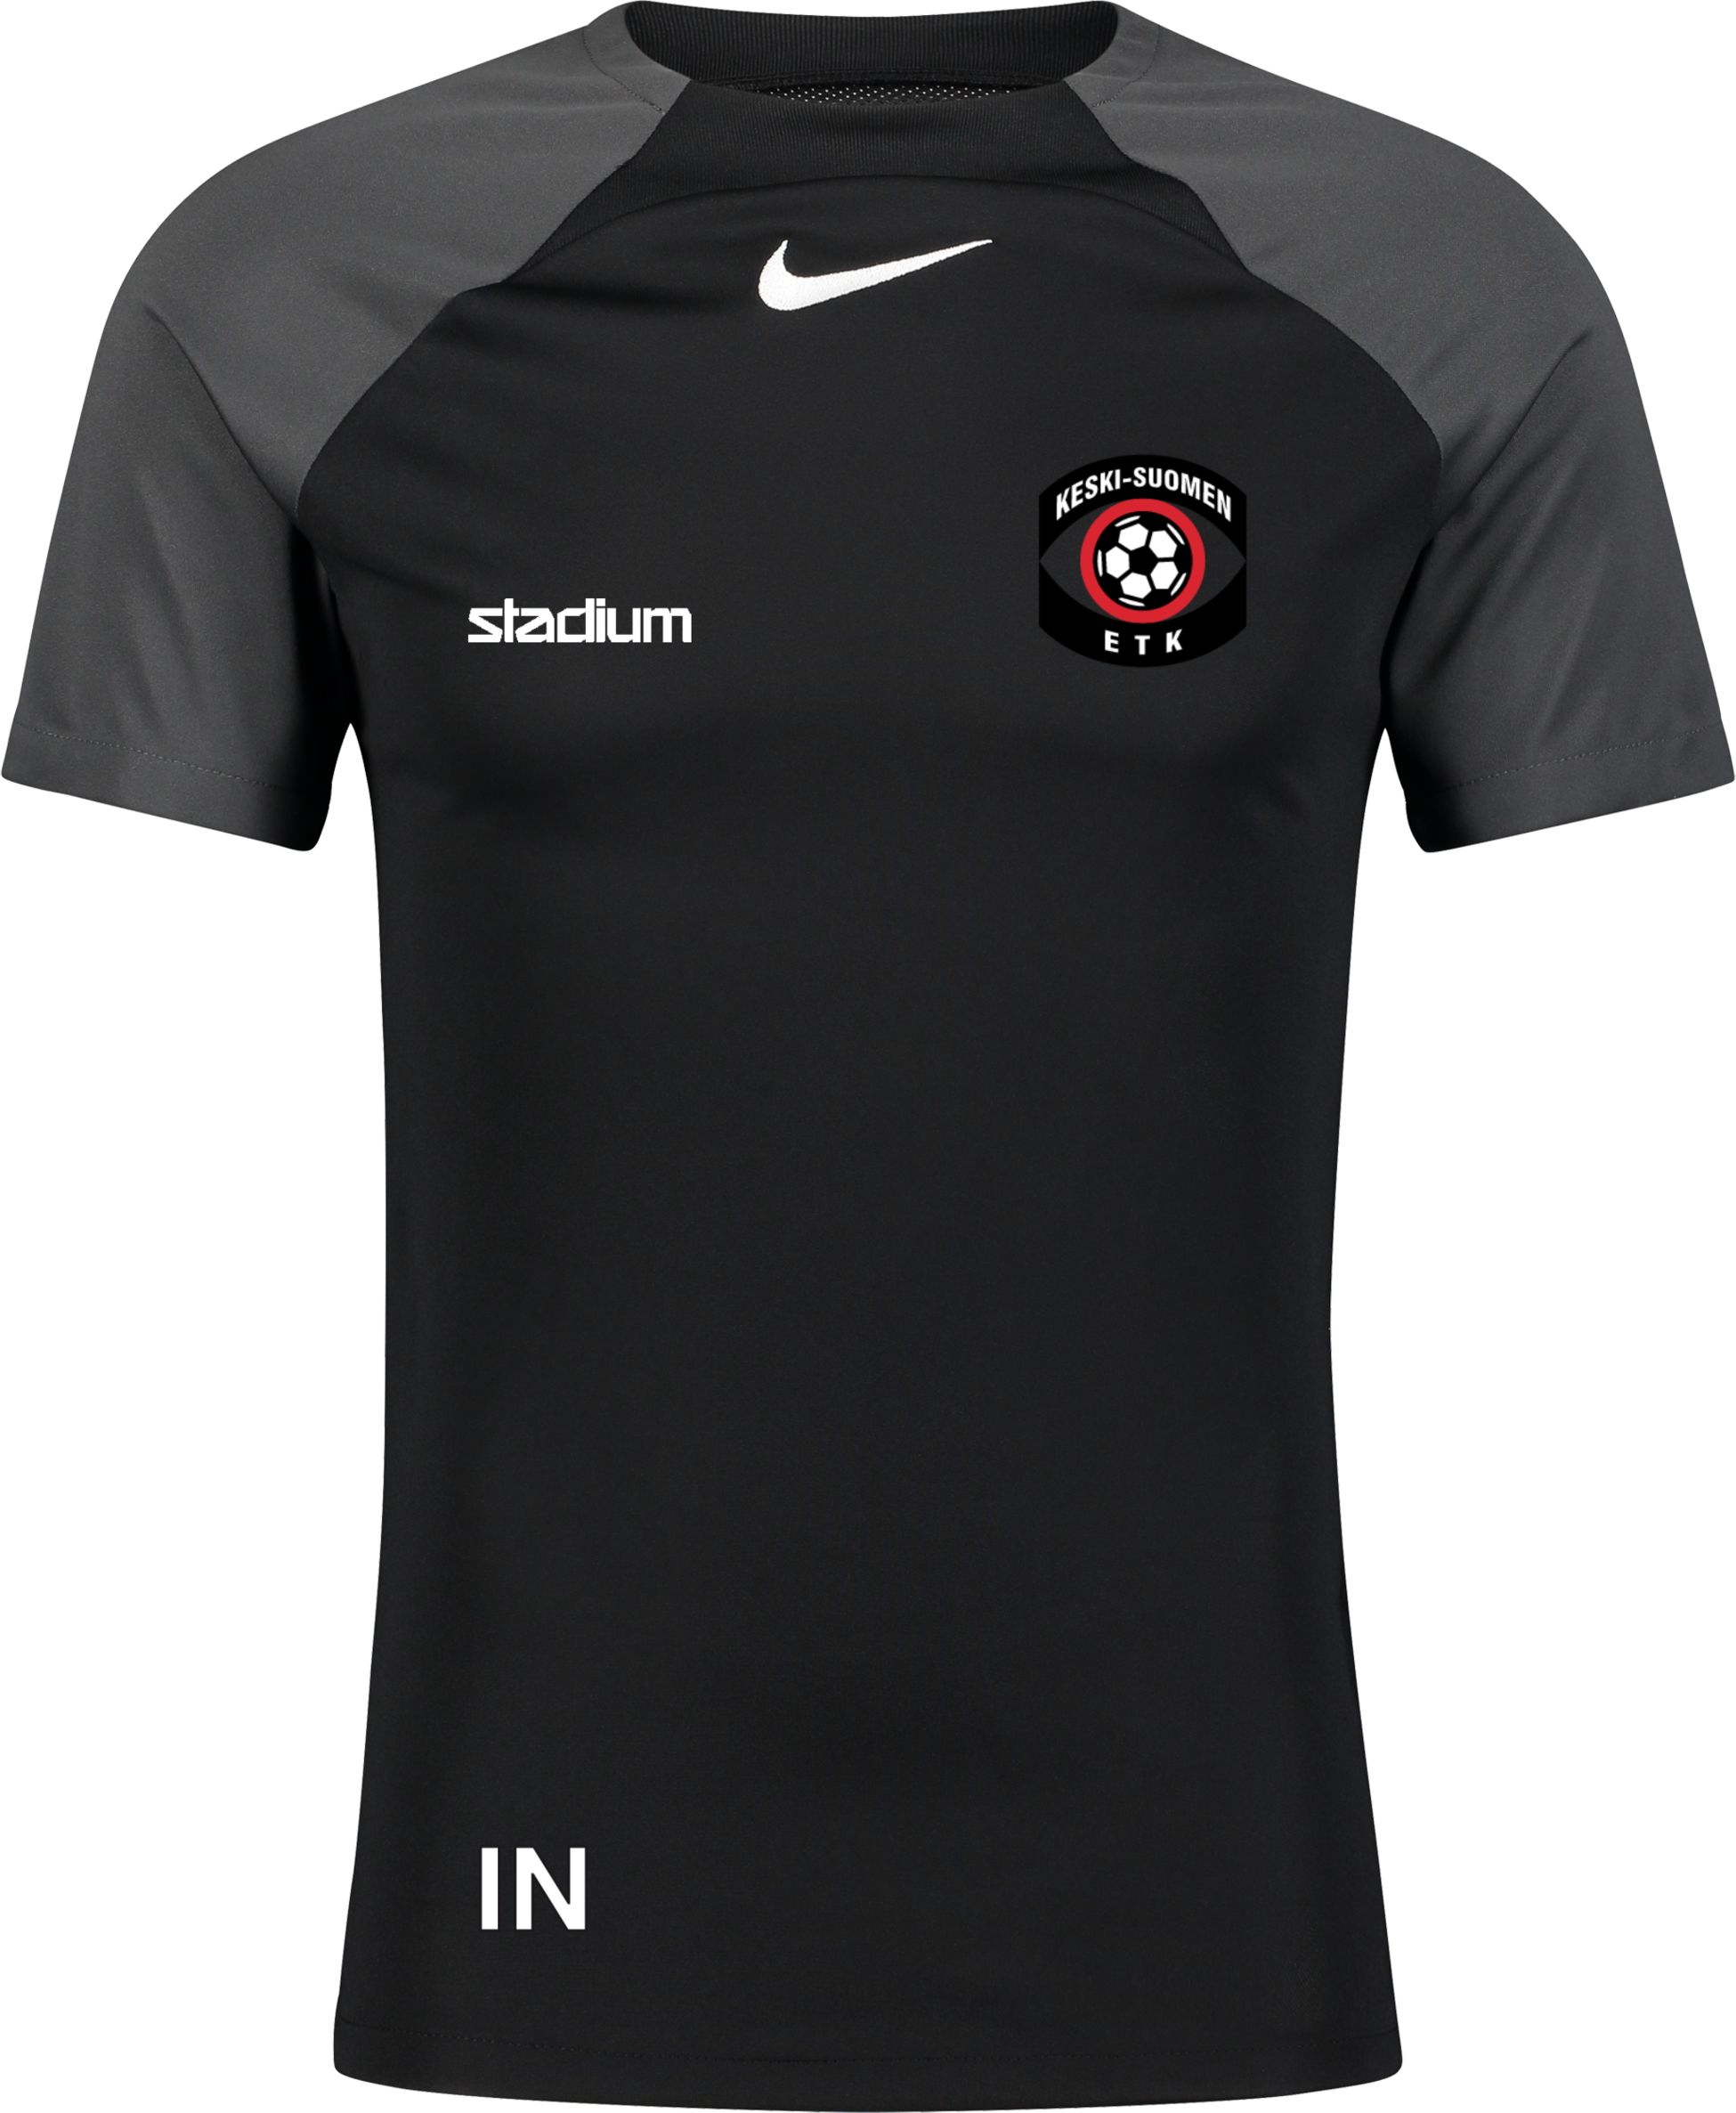 NIKE, ACADEMY PRO SS TOP